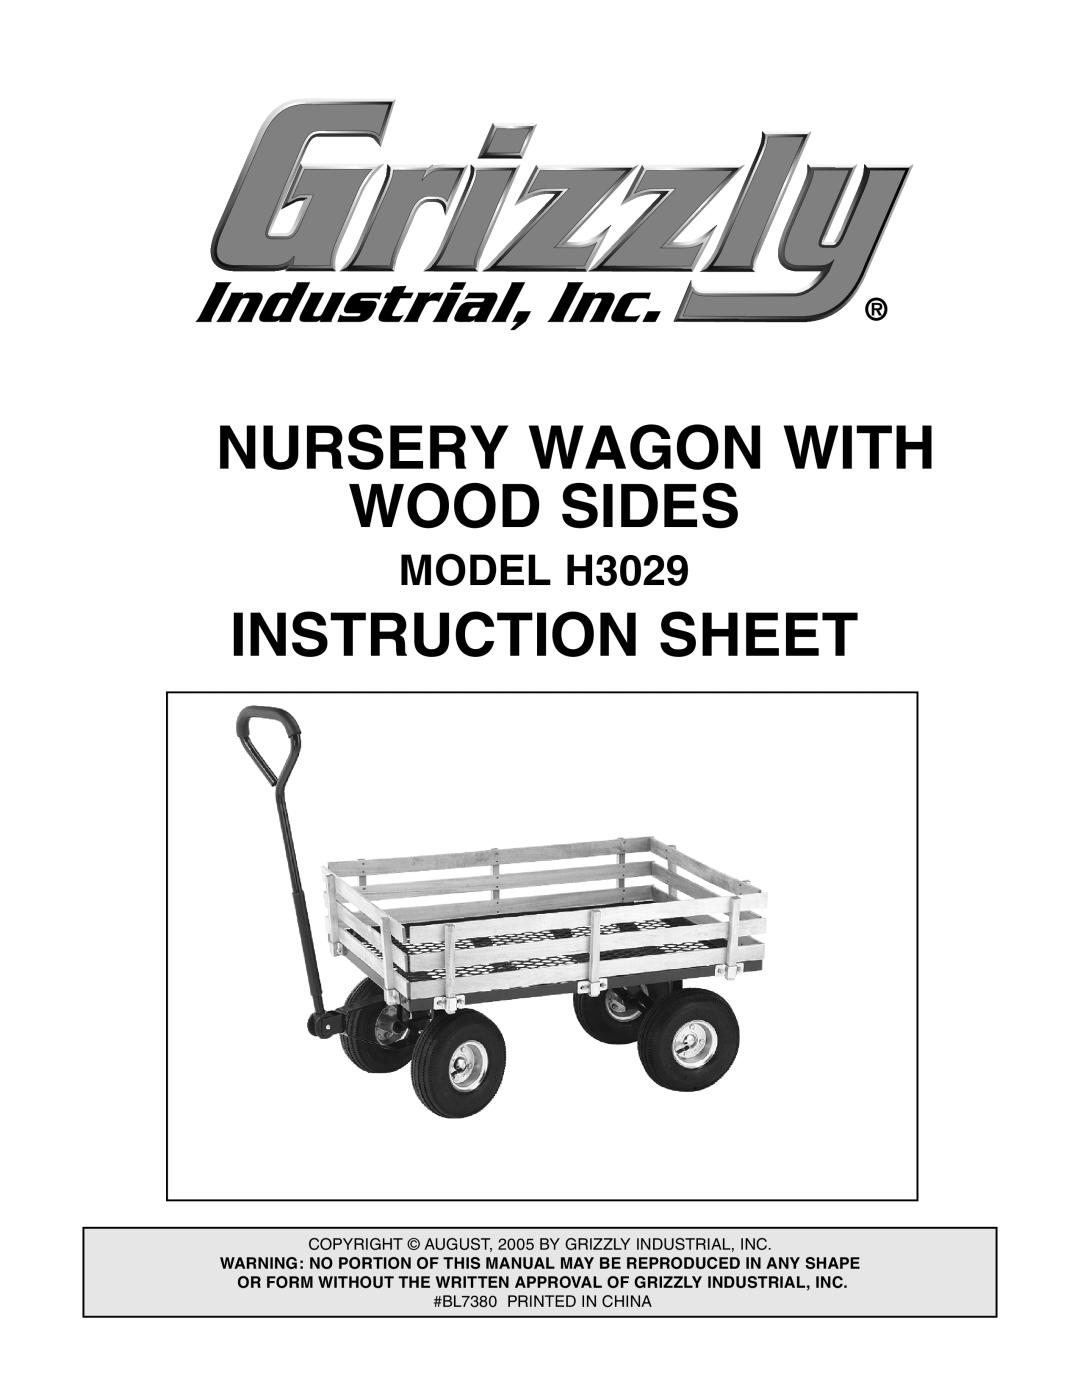 Grizzly instruction sheet MODEL H3029, Nursery Wagon With Wood Sides, Instruction Sheet 